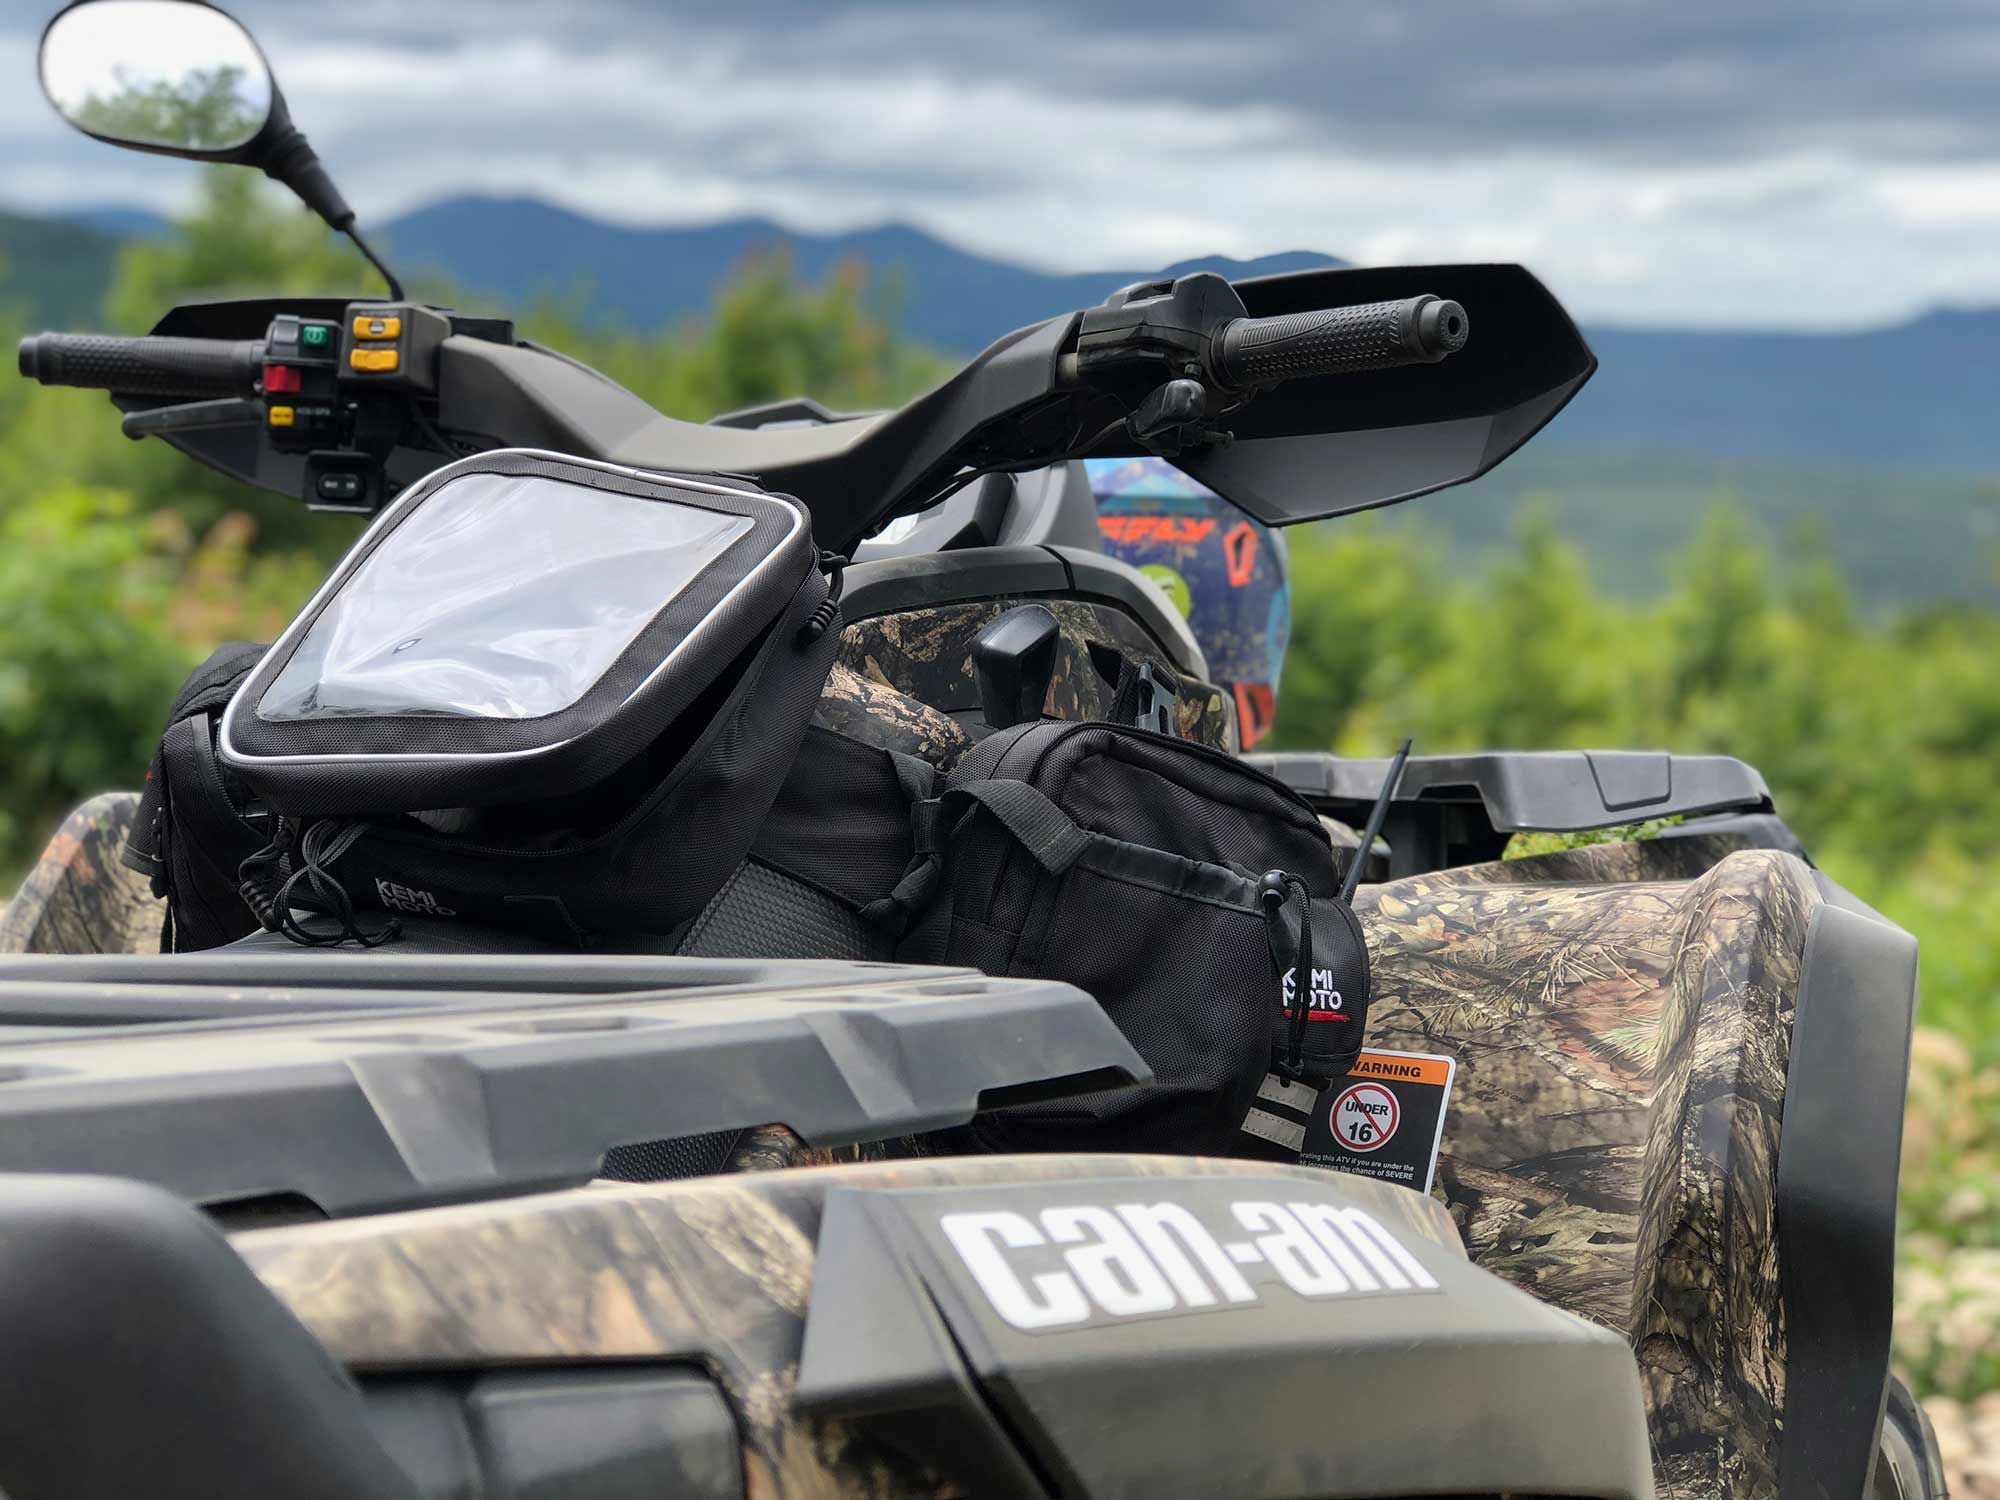 If you’re into overnight camping trips with your ATV, you might have to get creative with cargo space.